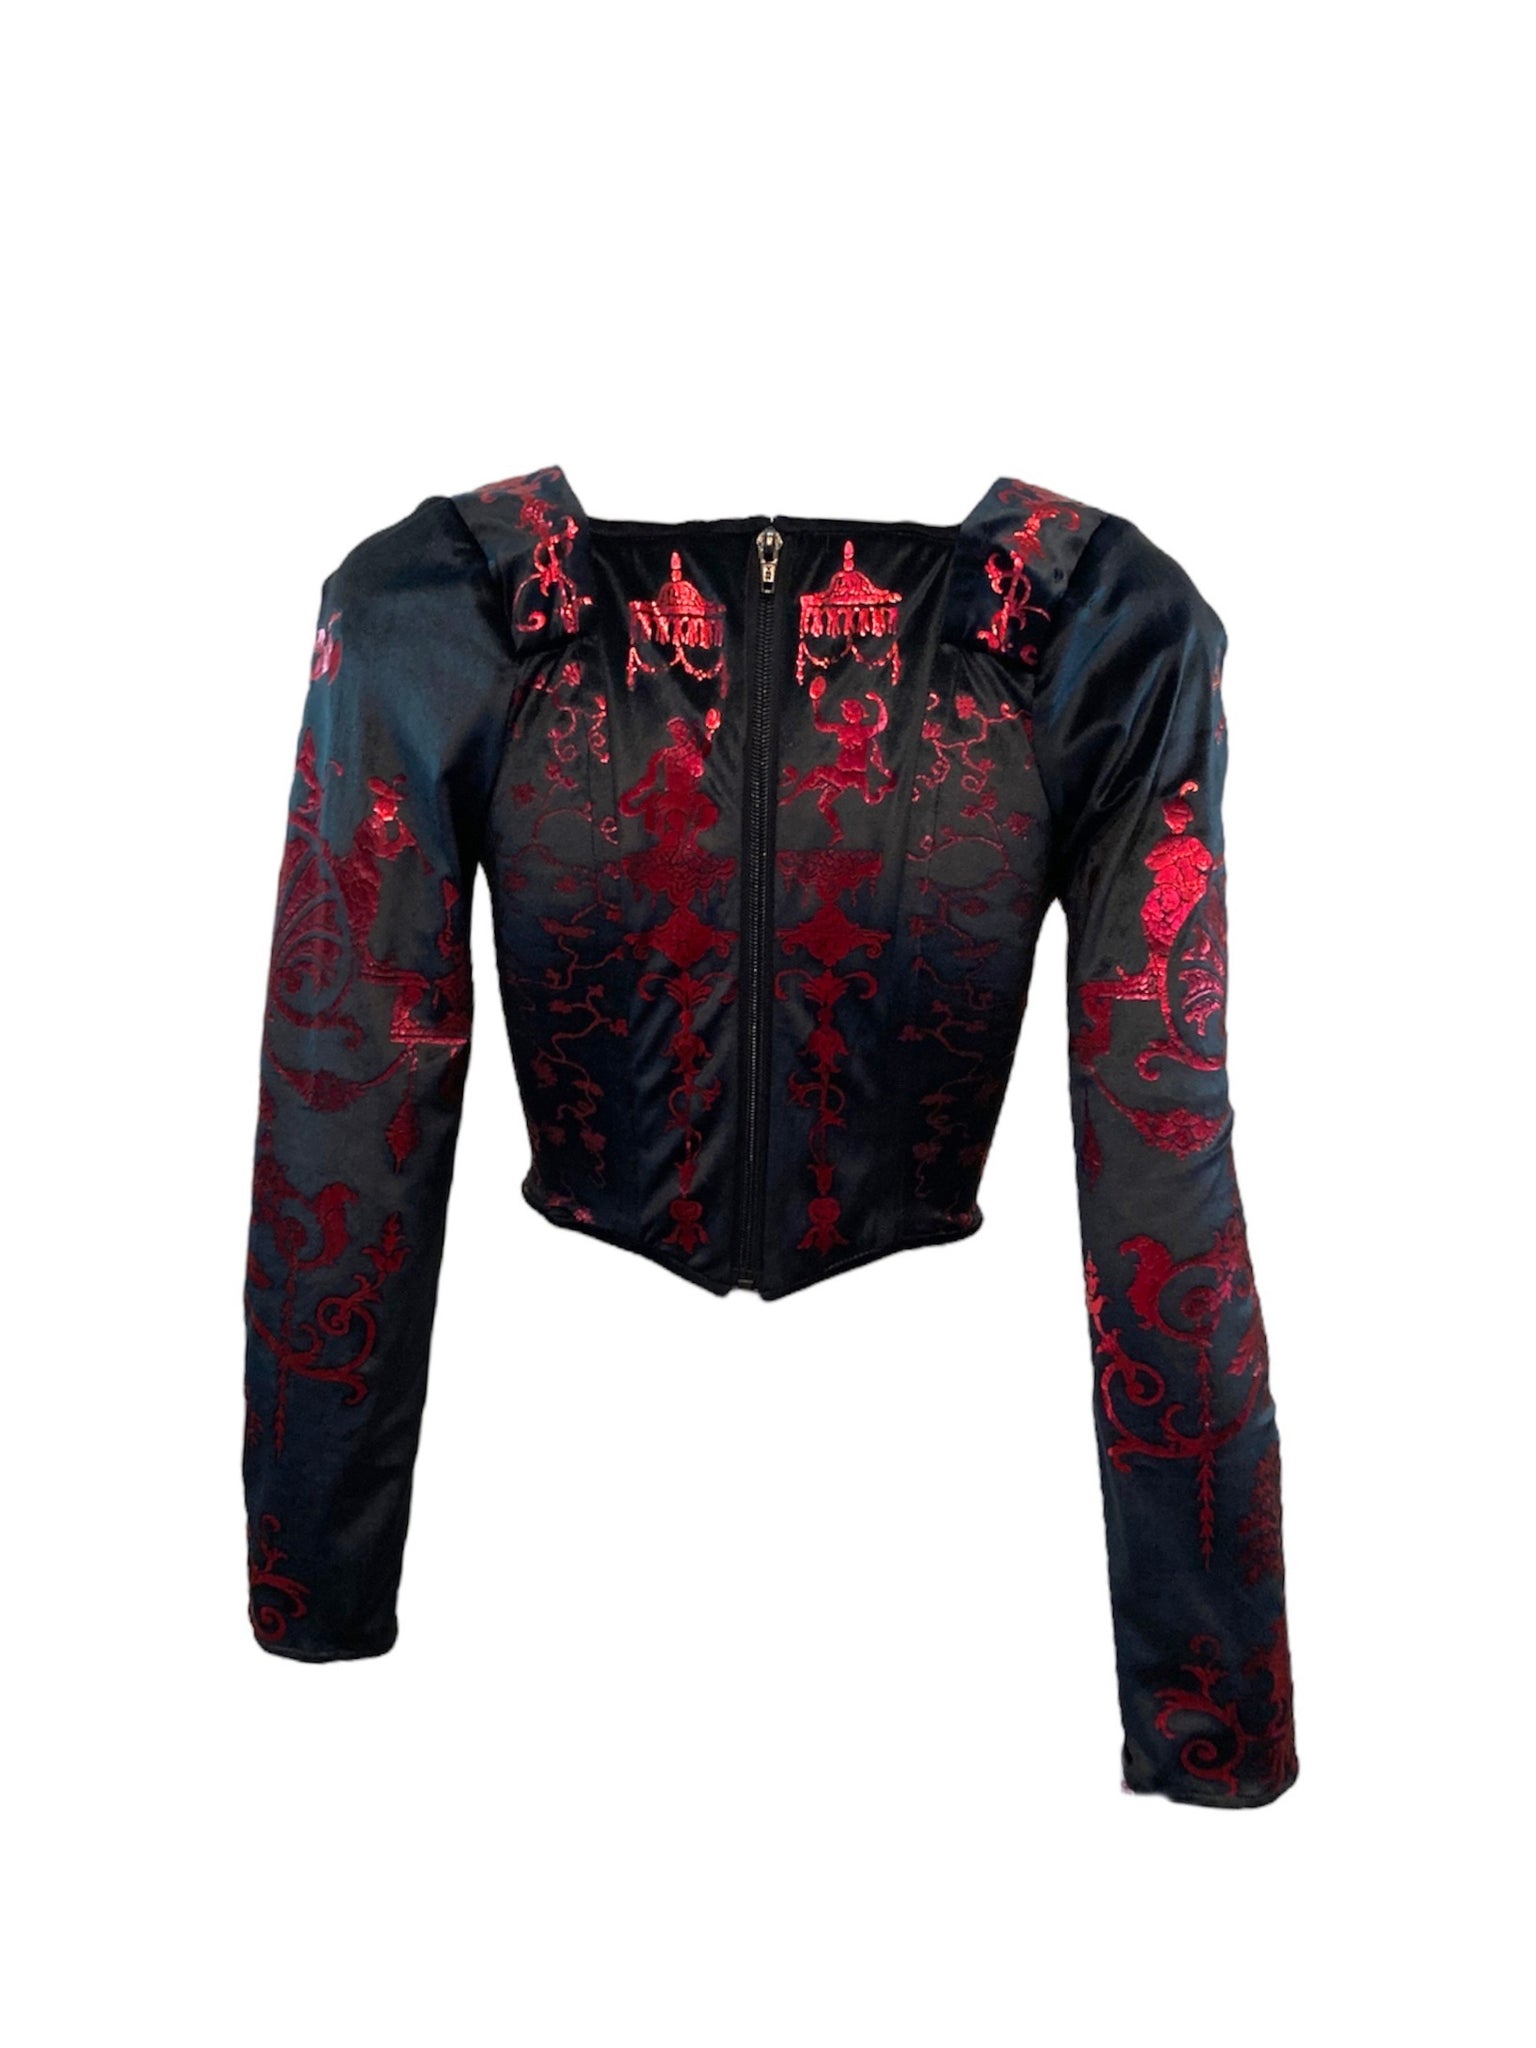 Vivienne Westwood 90s Black Corset Top with Red Metallic Decoration. BACK 3 of 5